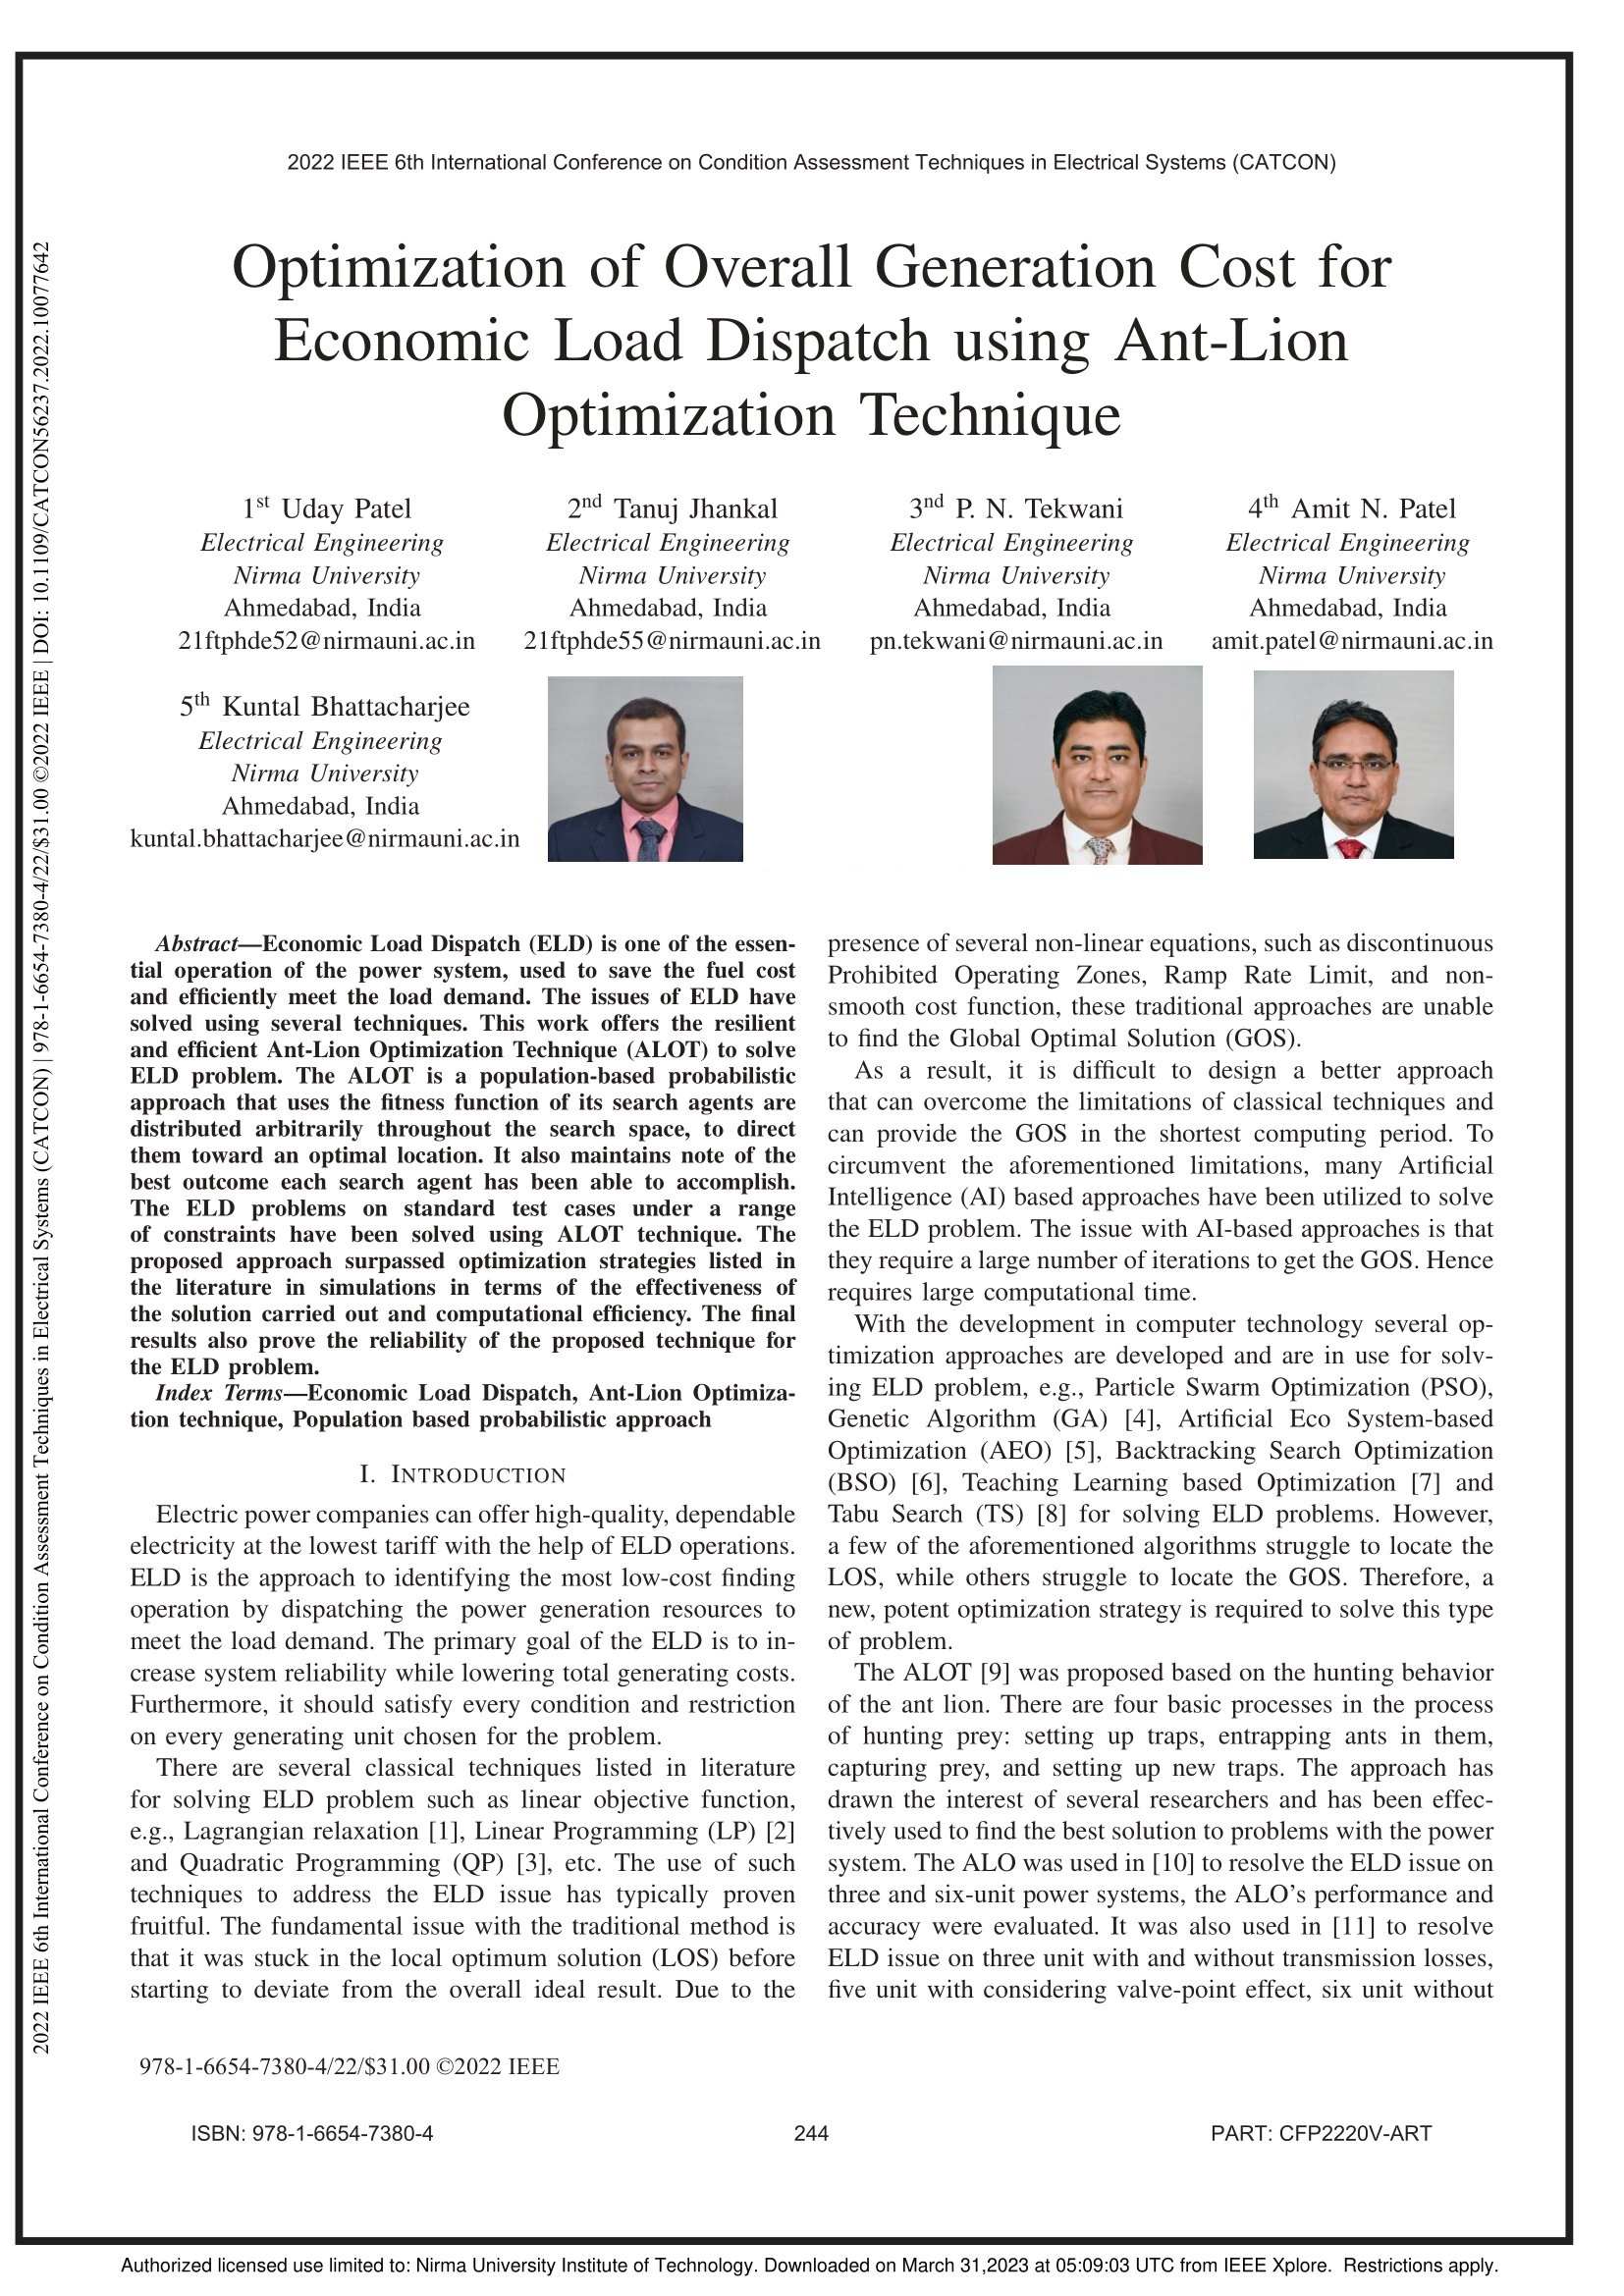 Optimization of overall generation cost for economic load dispatch using ant-lion optimization technique